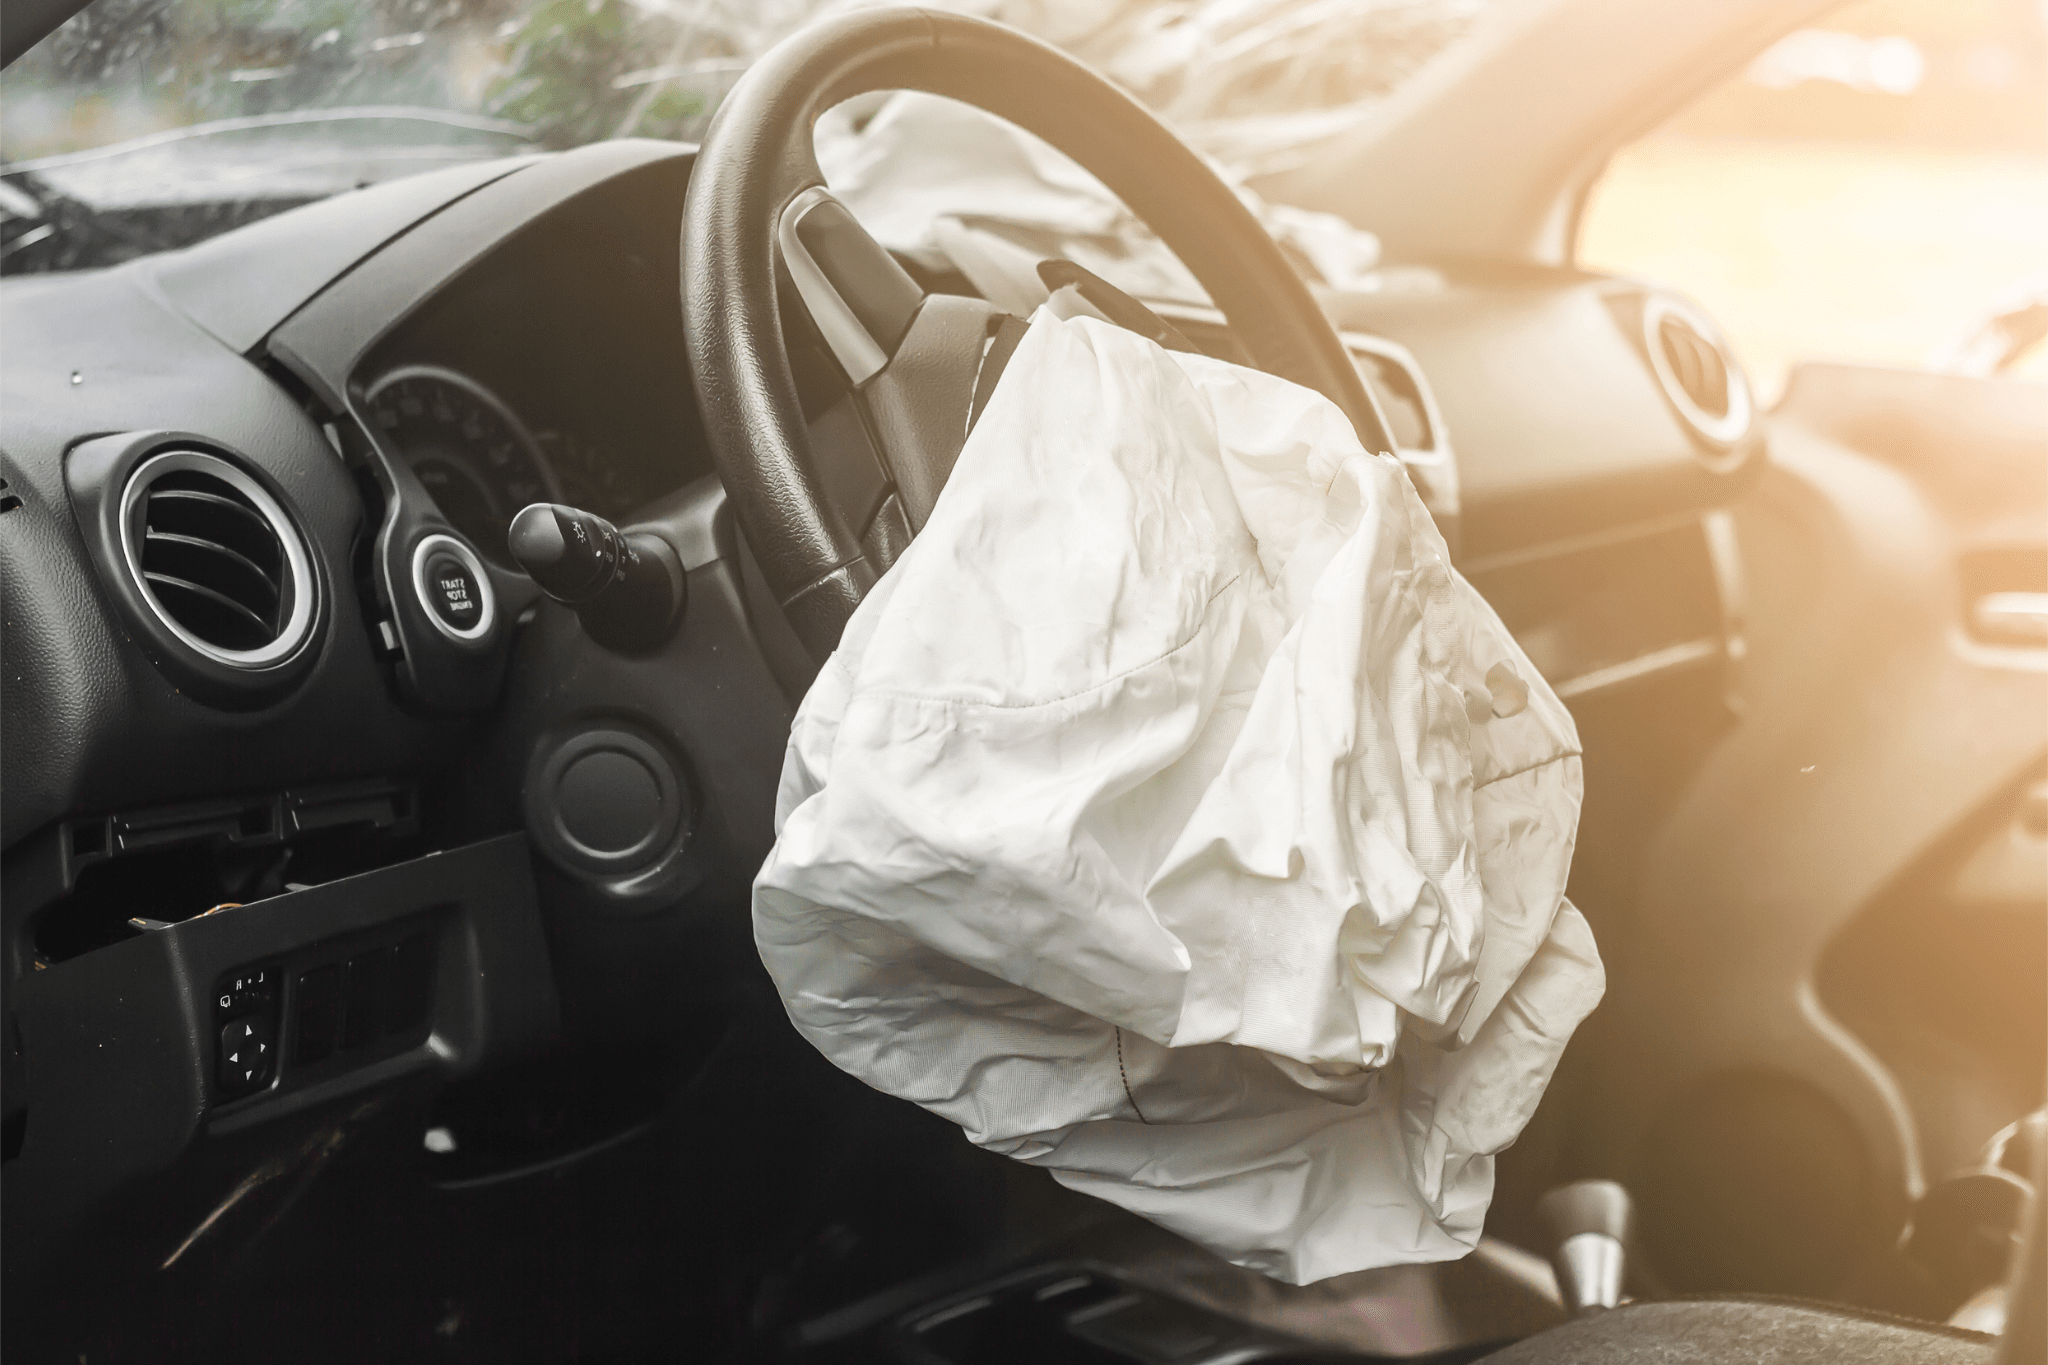 airbag exploded at a car accident